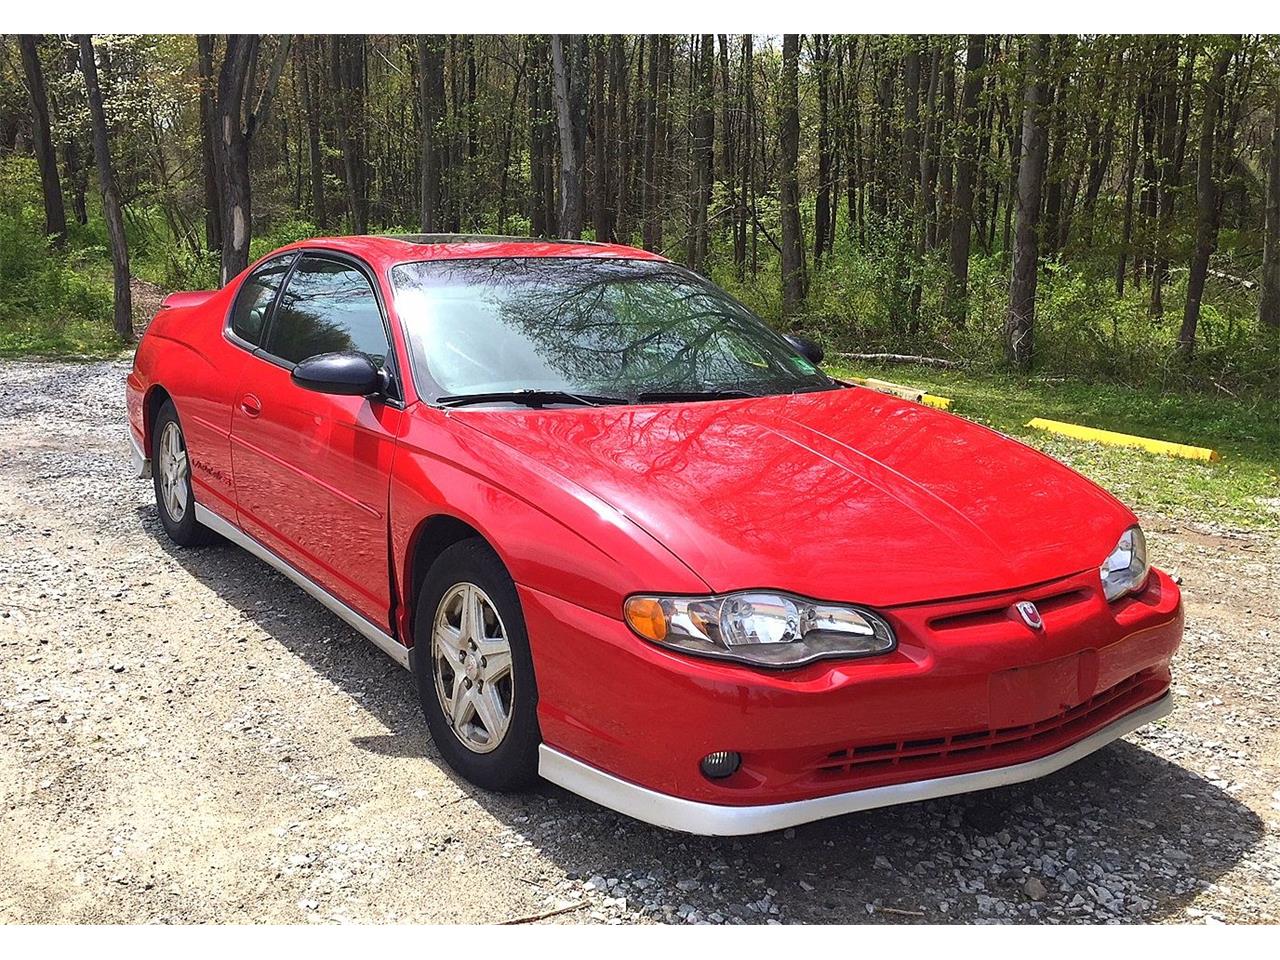 Simple 2003 monte carlo antique car for sale with Best Inspiration